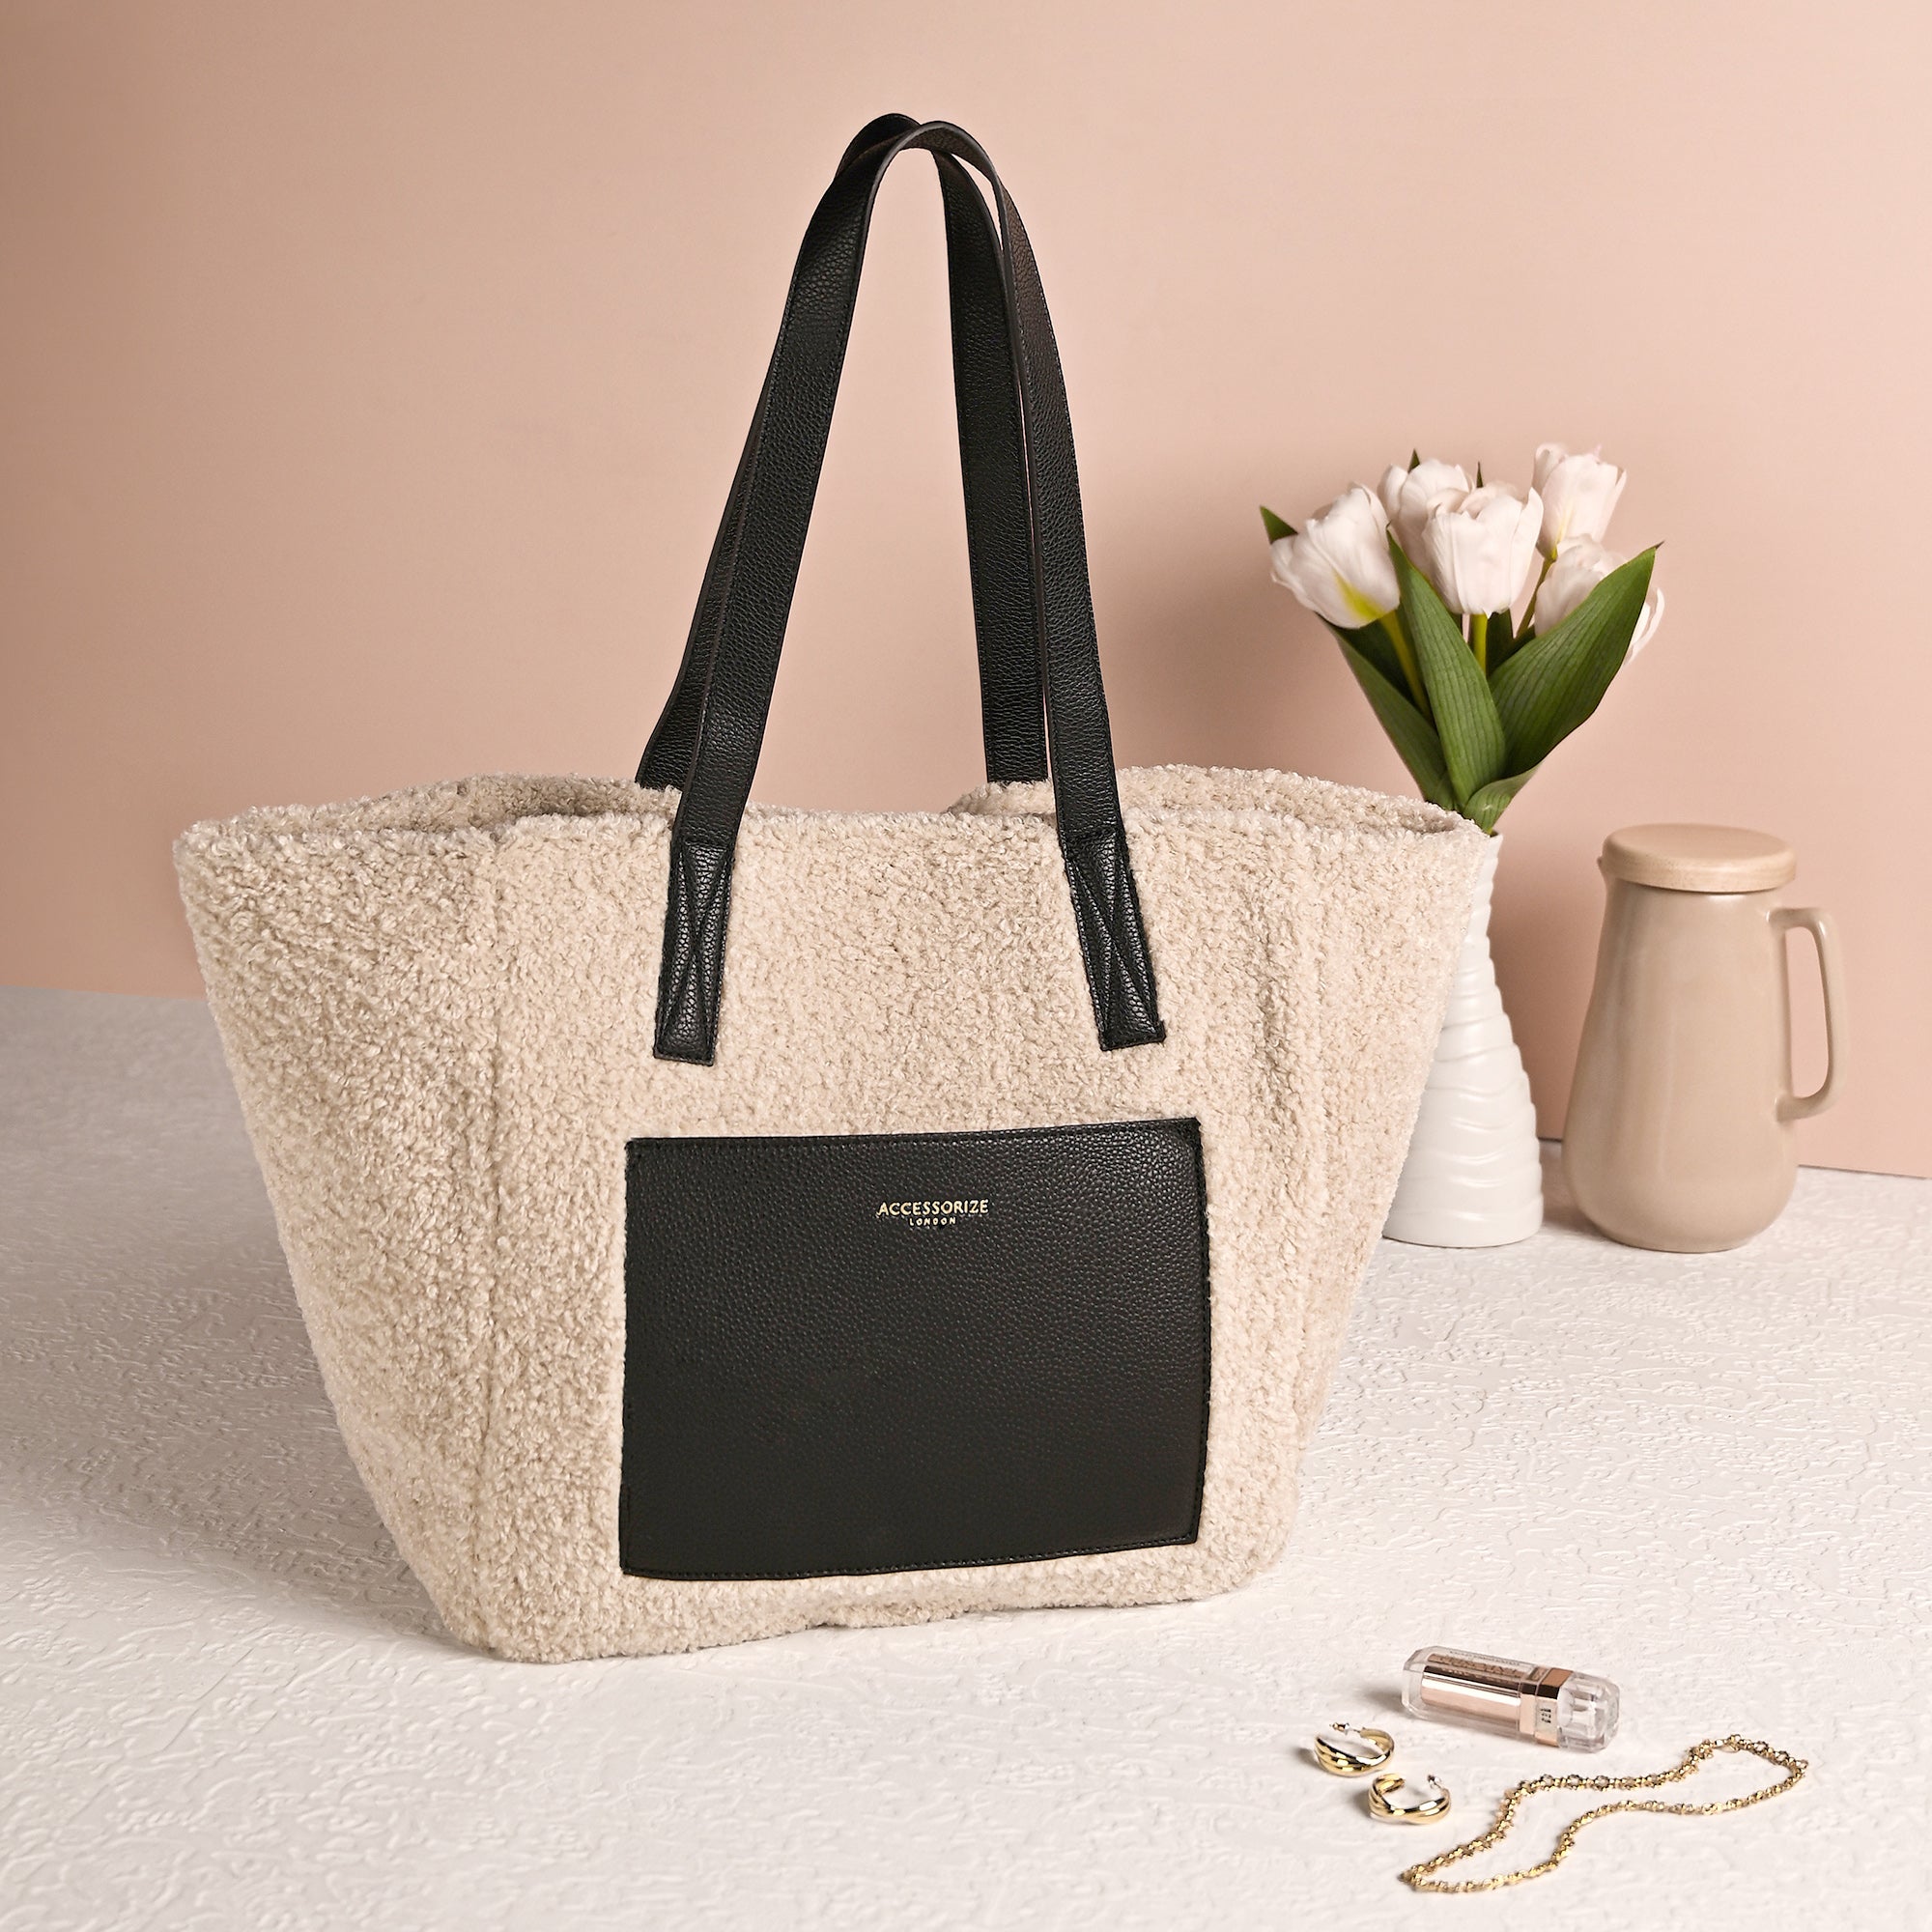 Accessorize London Emily Monogram Tote Bag: Buy Accessorize London Emily  Monogram Tote Bag Online at Best Price in India